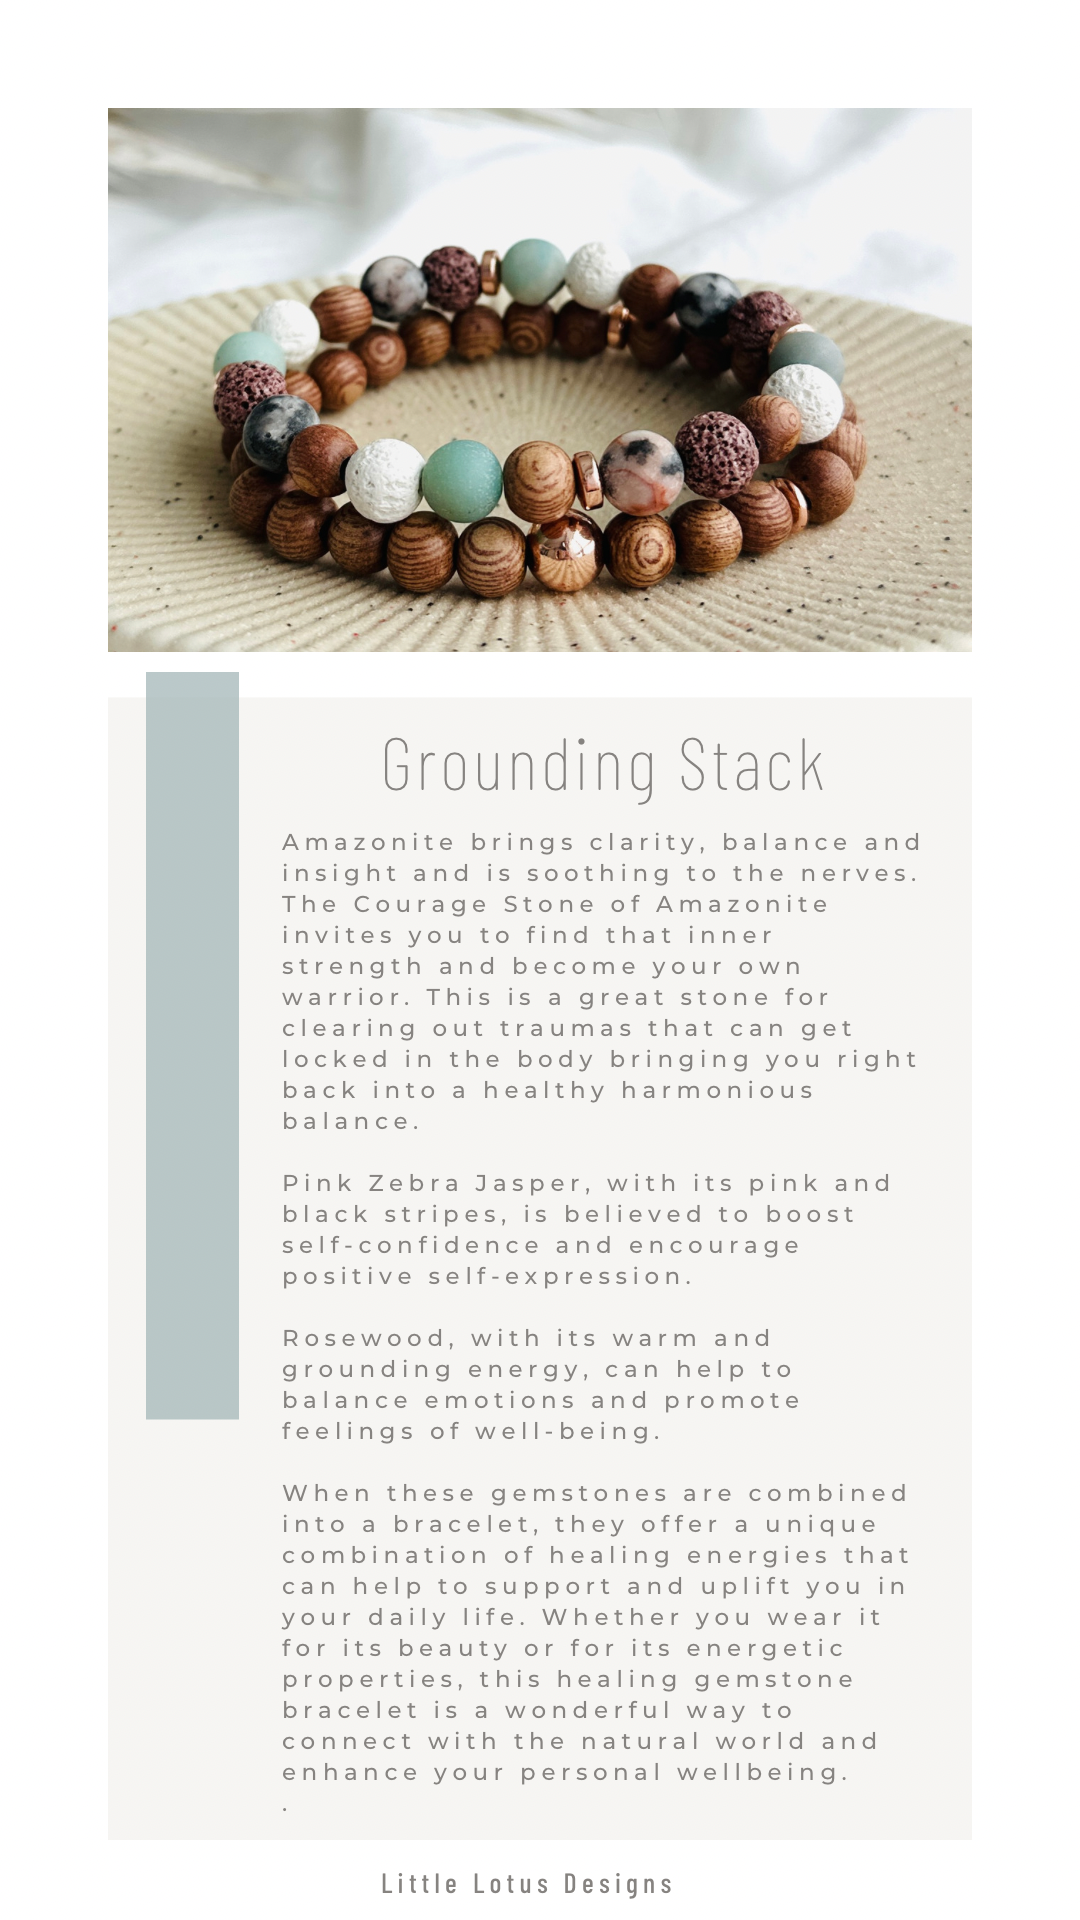 The Grounding Stack